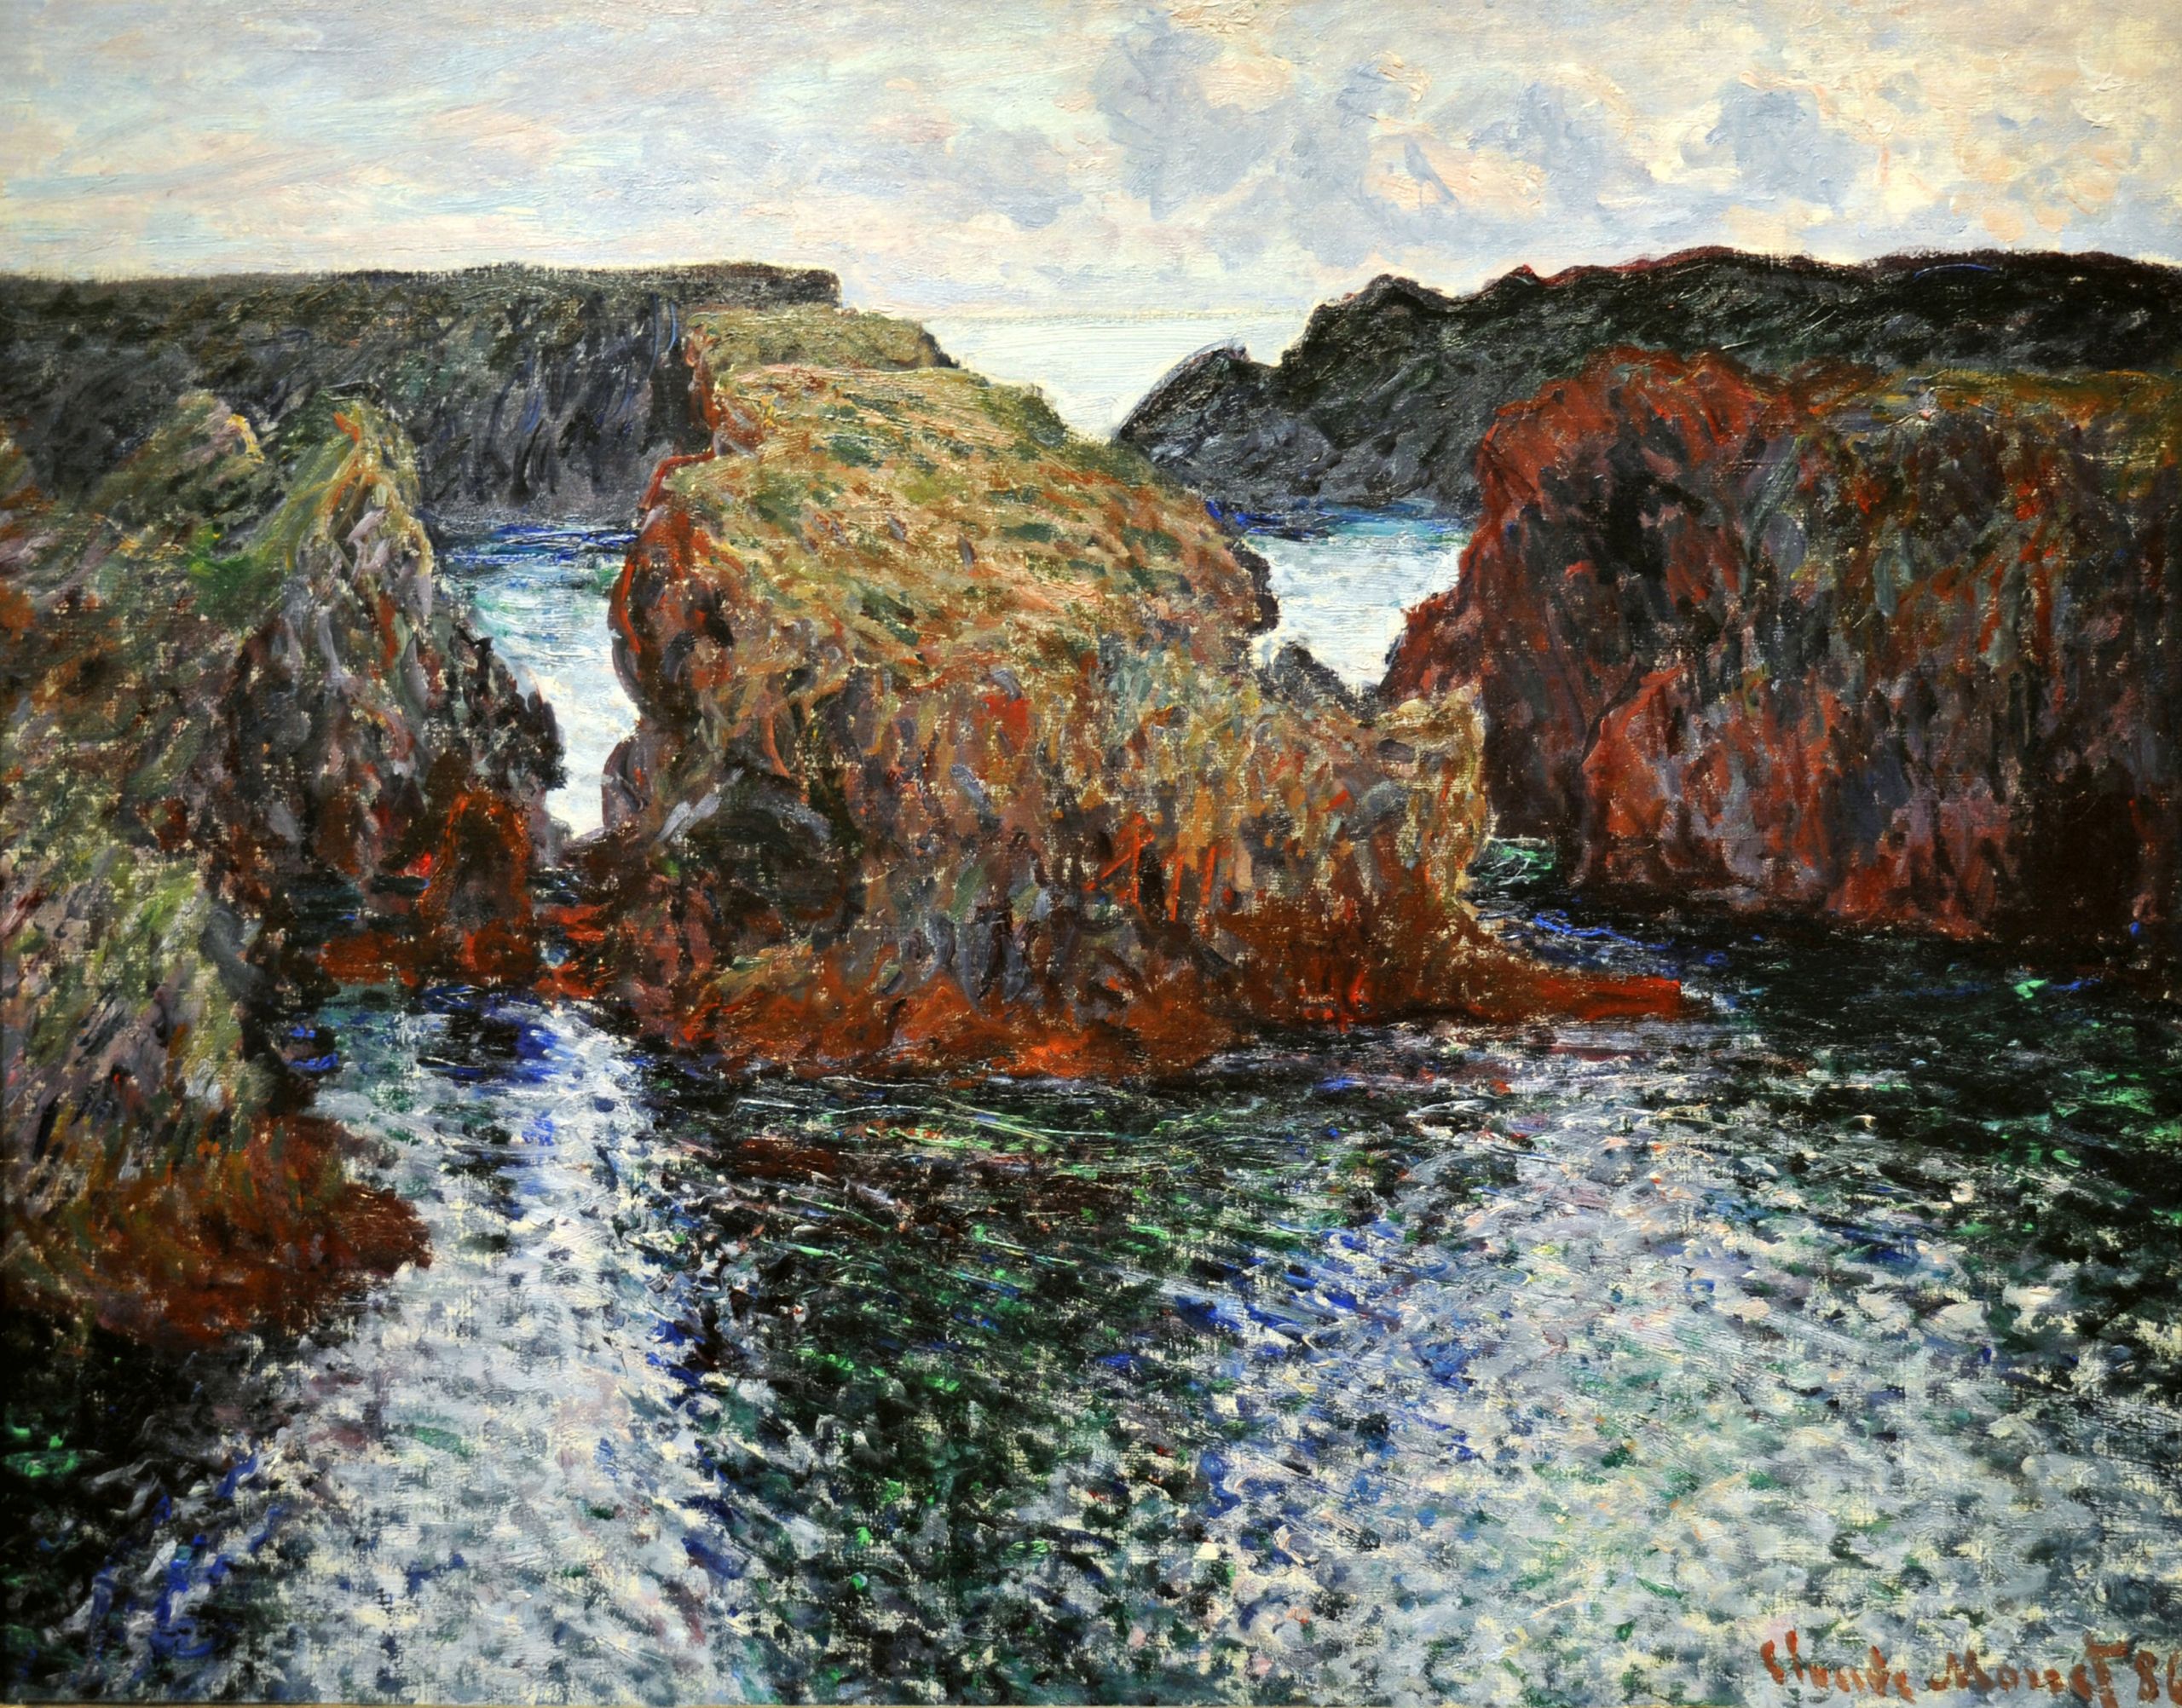 Monet Landscape Paintings
 A Contrast of Impressionism and Realism in the portrayal